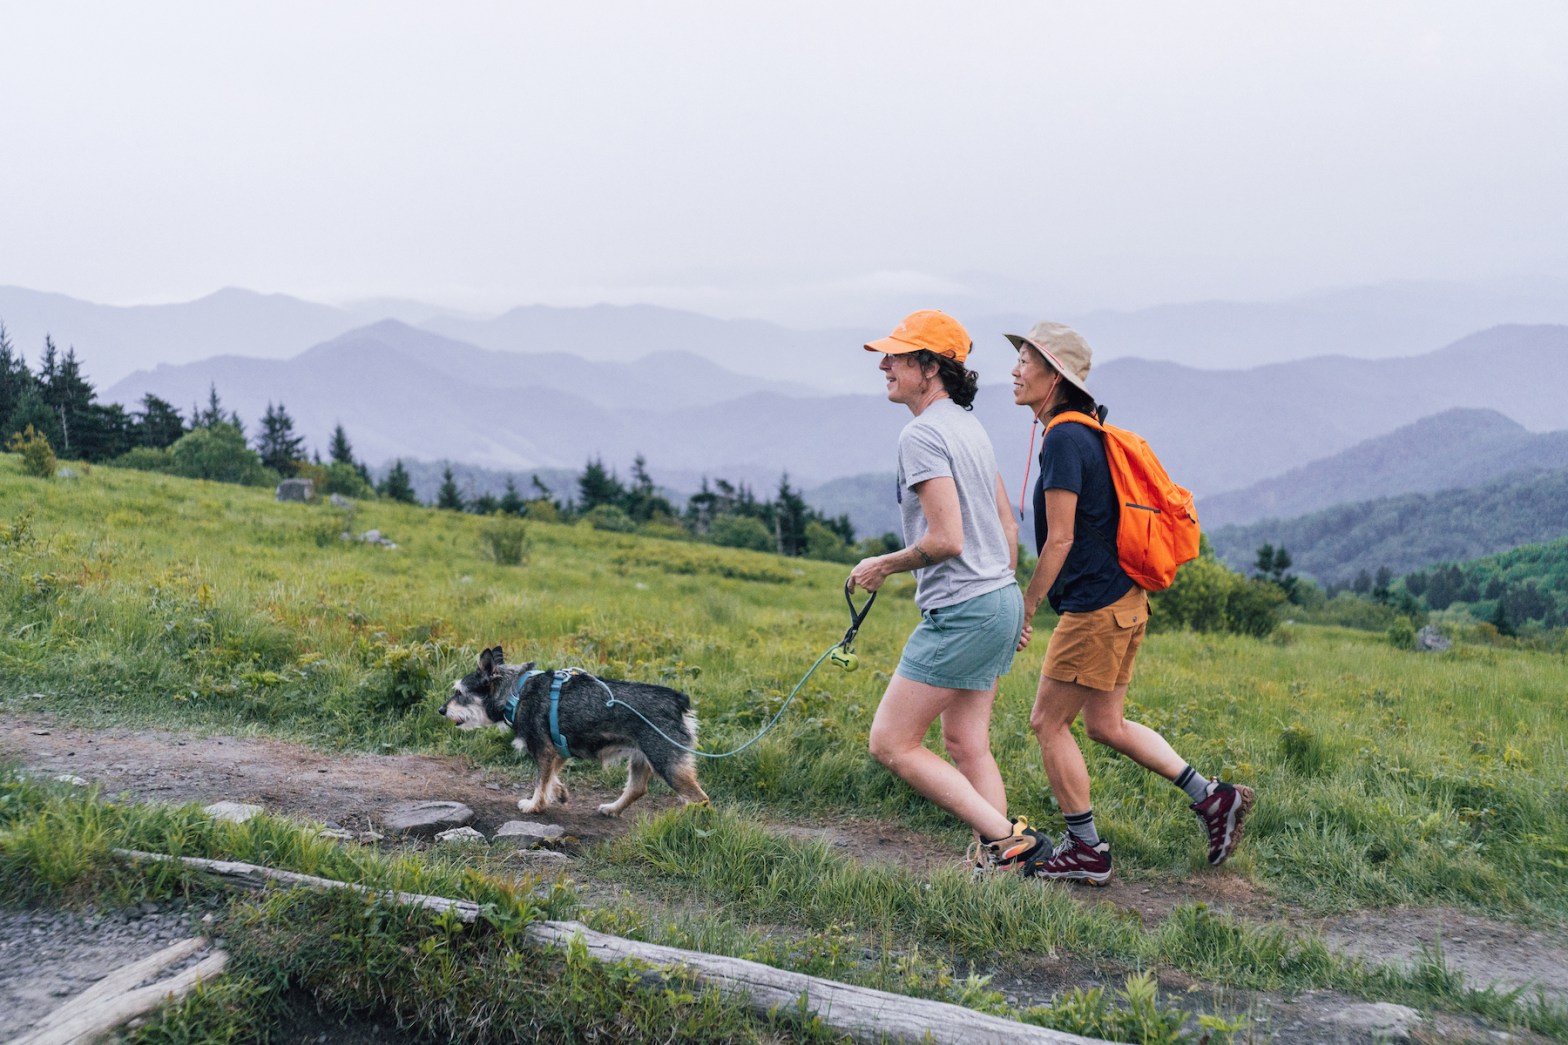 Caroline Whatley and Erin McGrady are holding hands and walking along a trail with a small brown dog. There are many layers of mountains in the background as well as a line of evergreen trees.